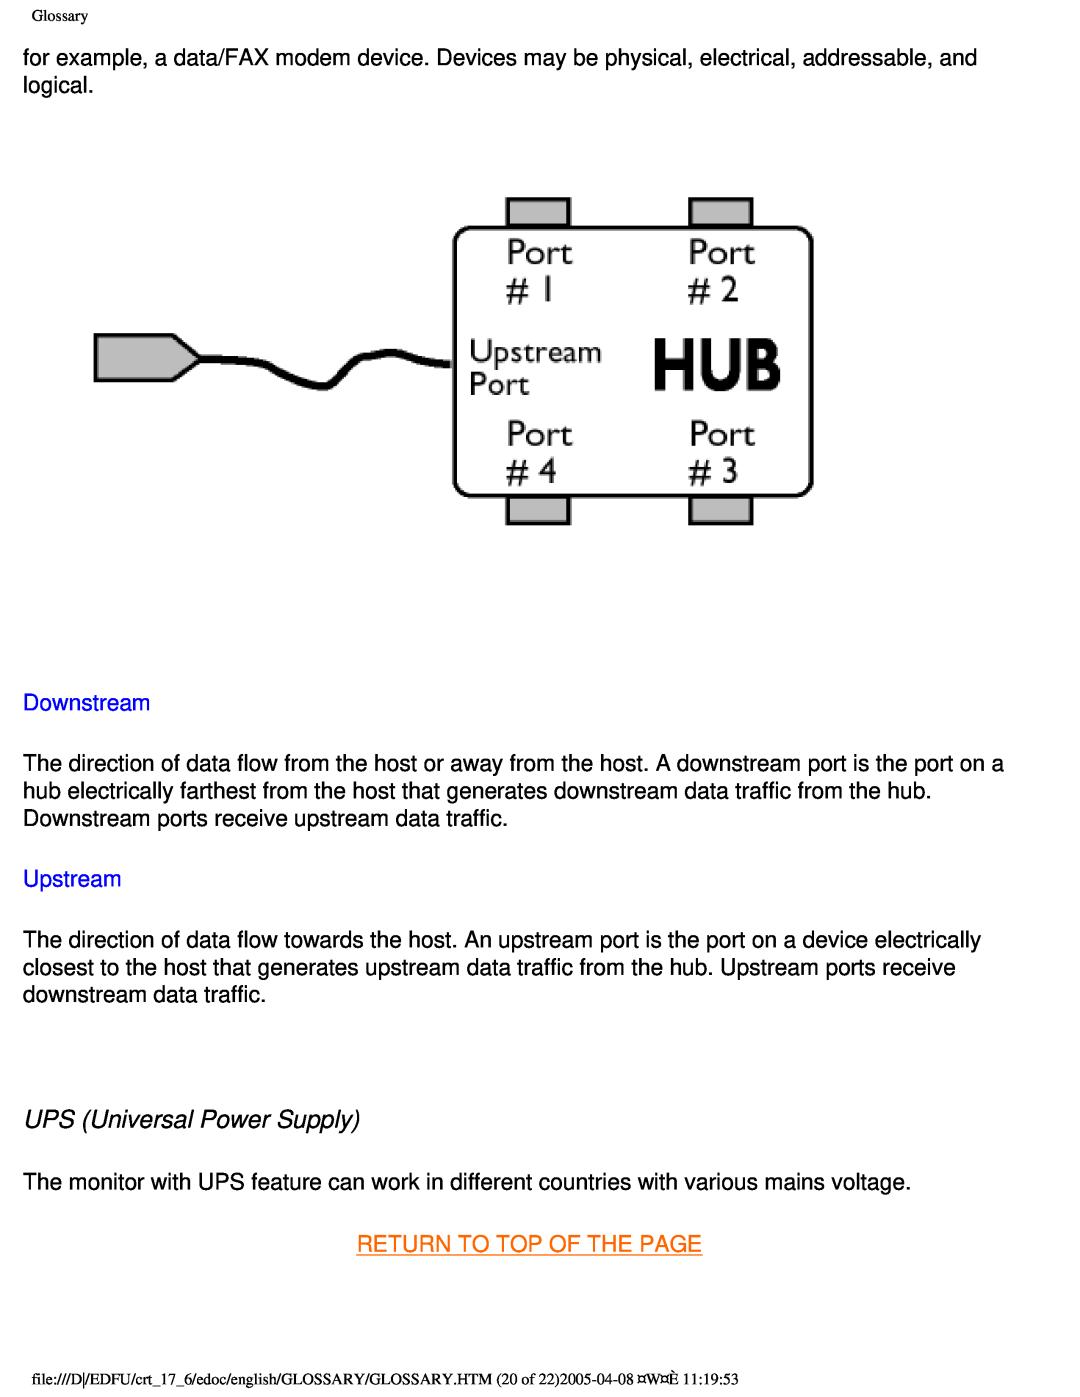 Philips 107C65 user manual UPS Universal Power Supply, Downstream, Upstream, Return To Top Of The Page 